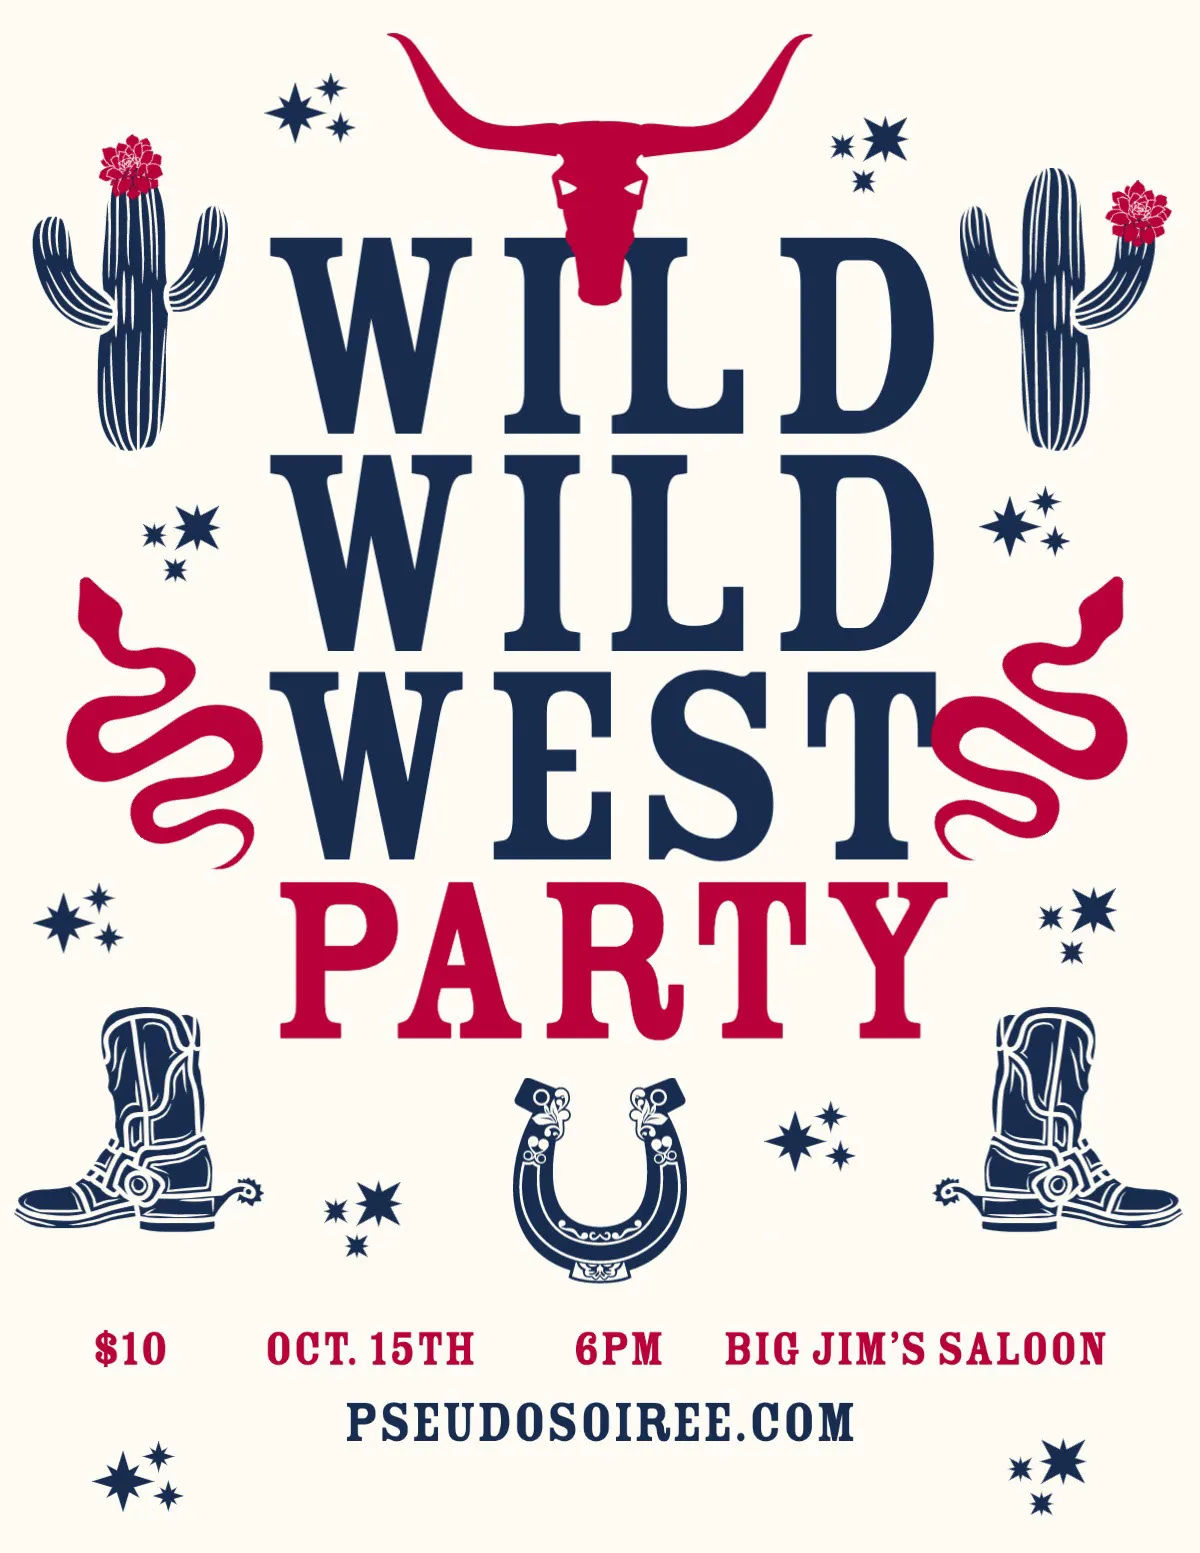 Blue and Beige Western Party Flyer 